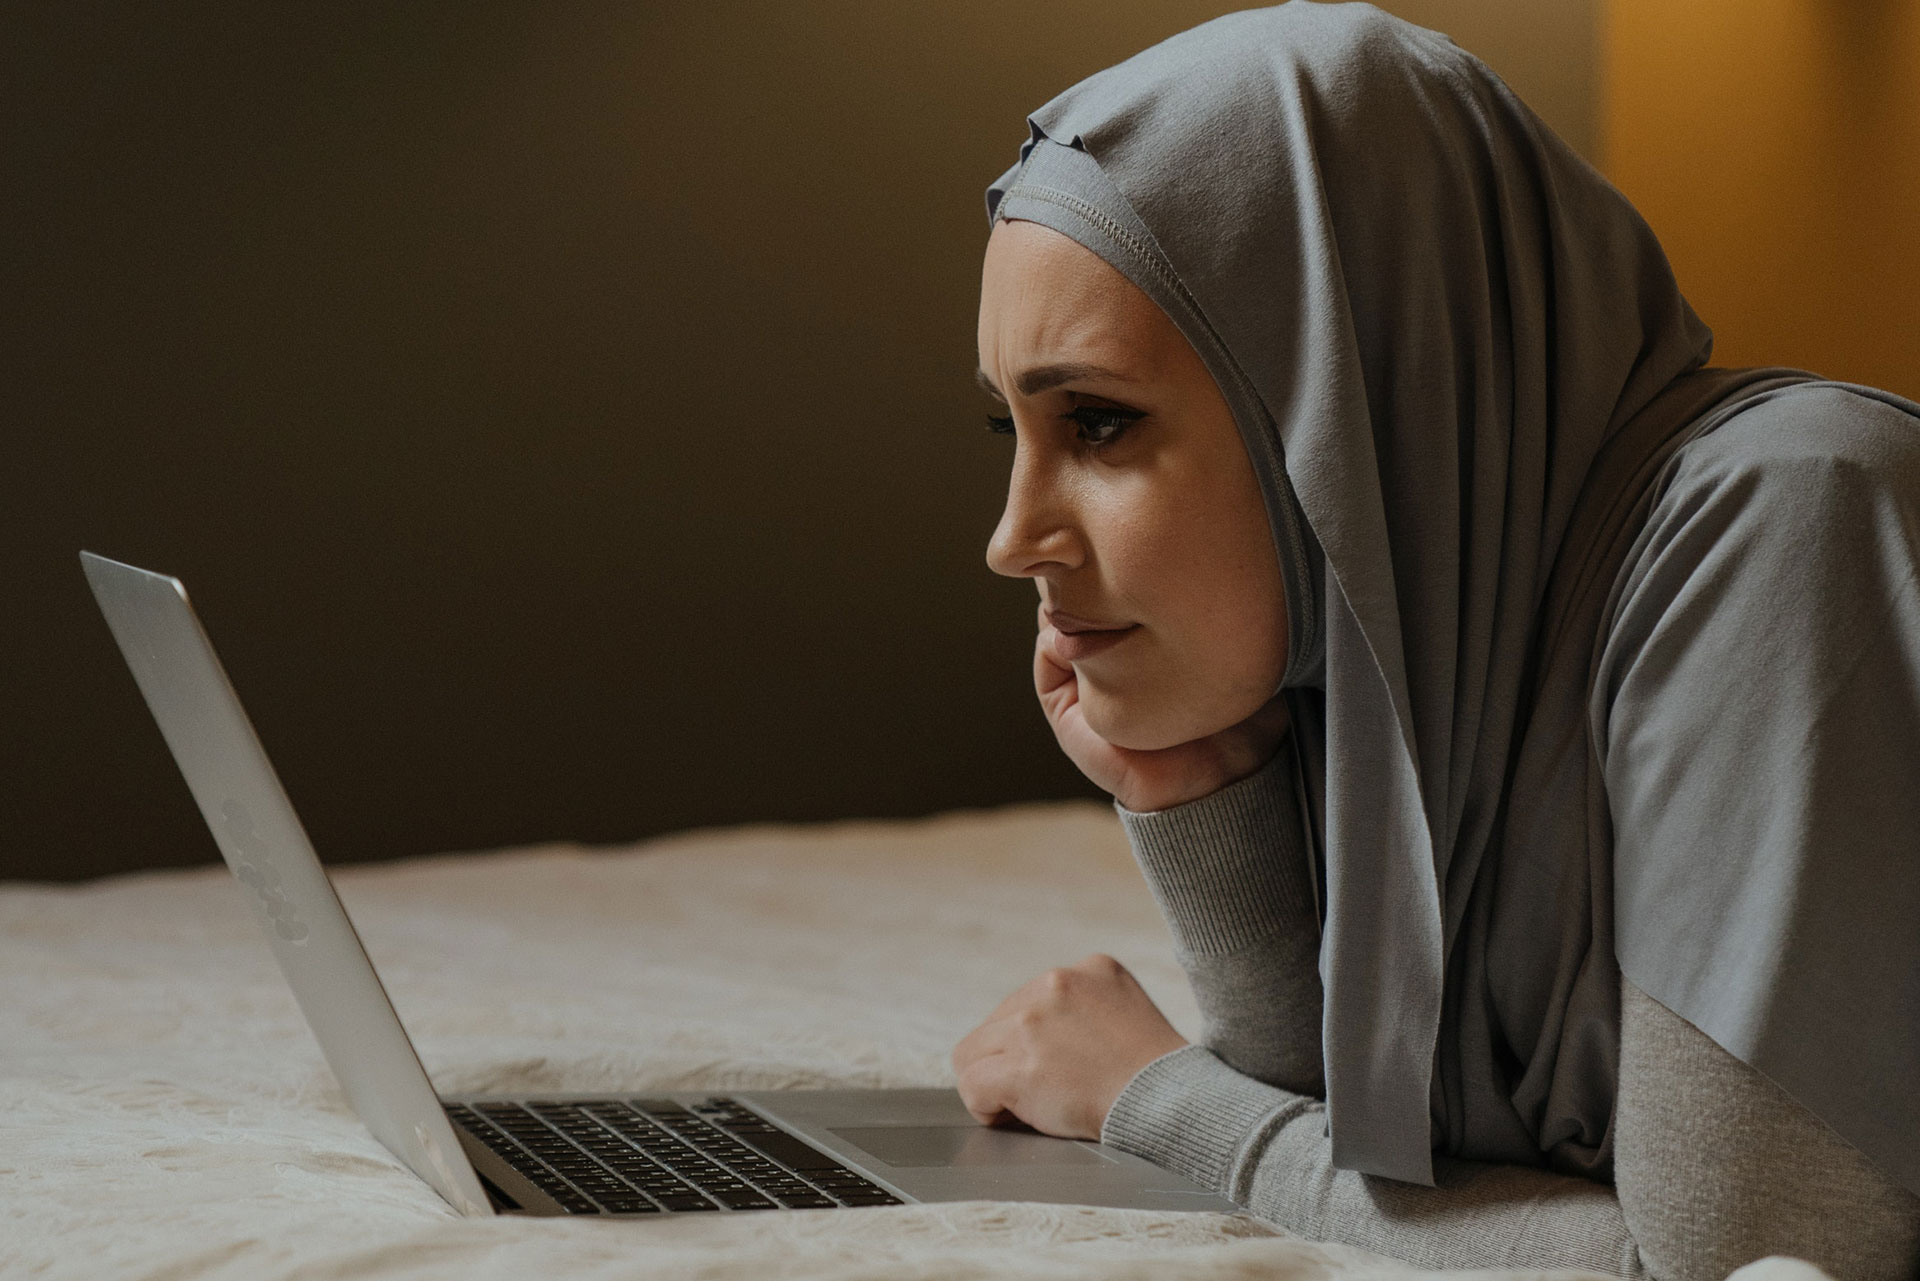 Woman in Gray Hijab using a laptop